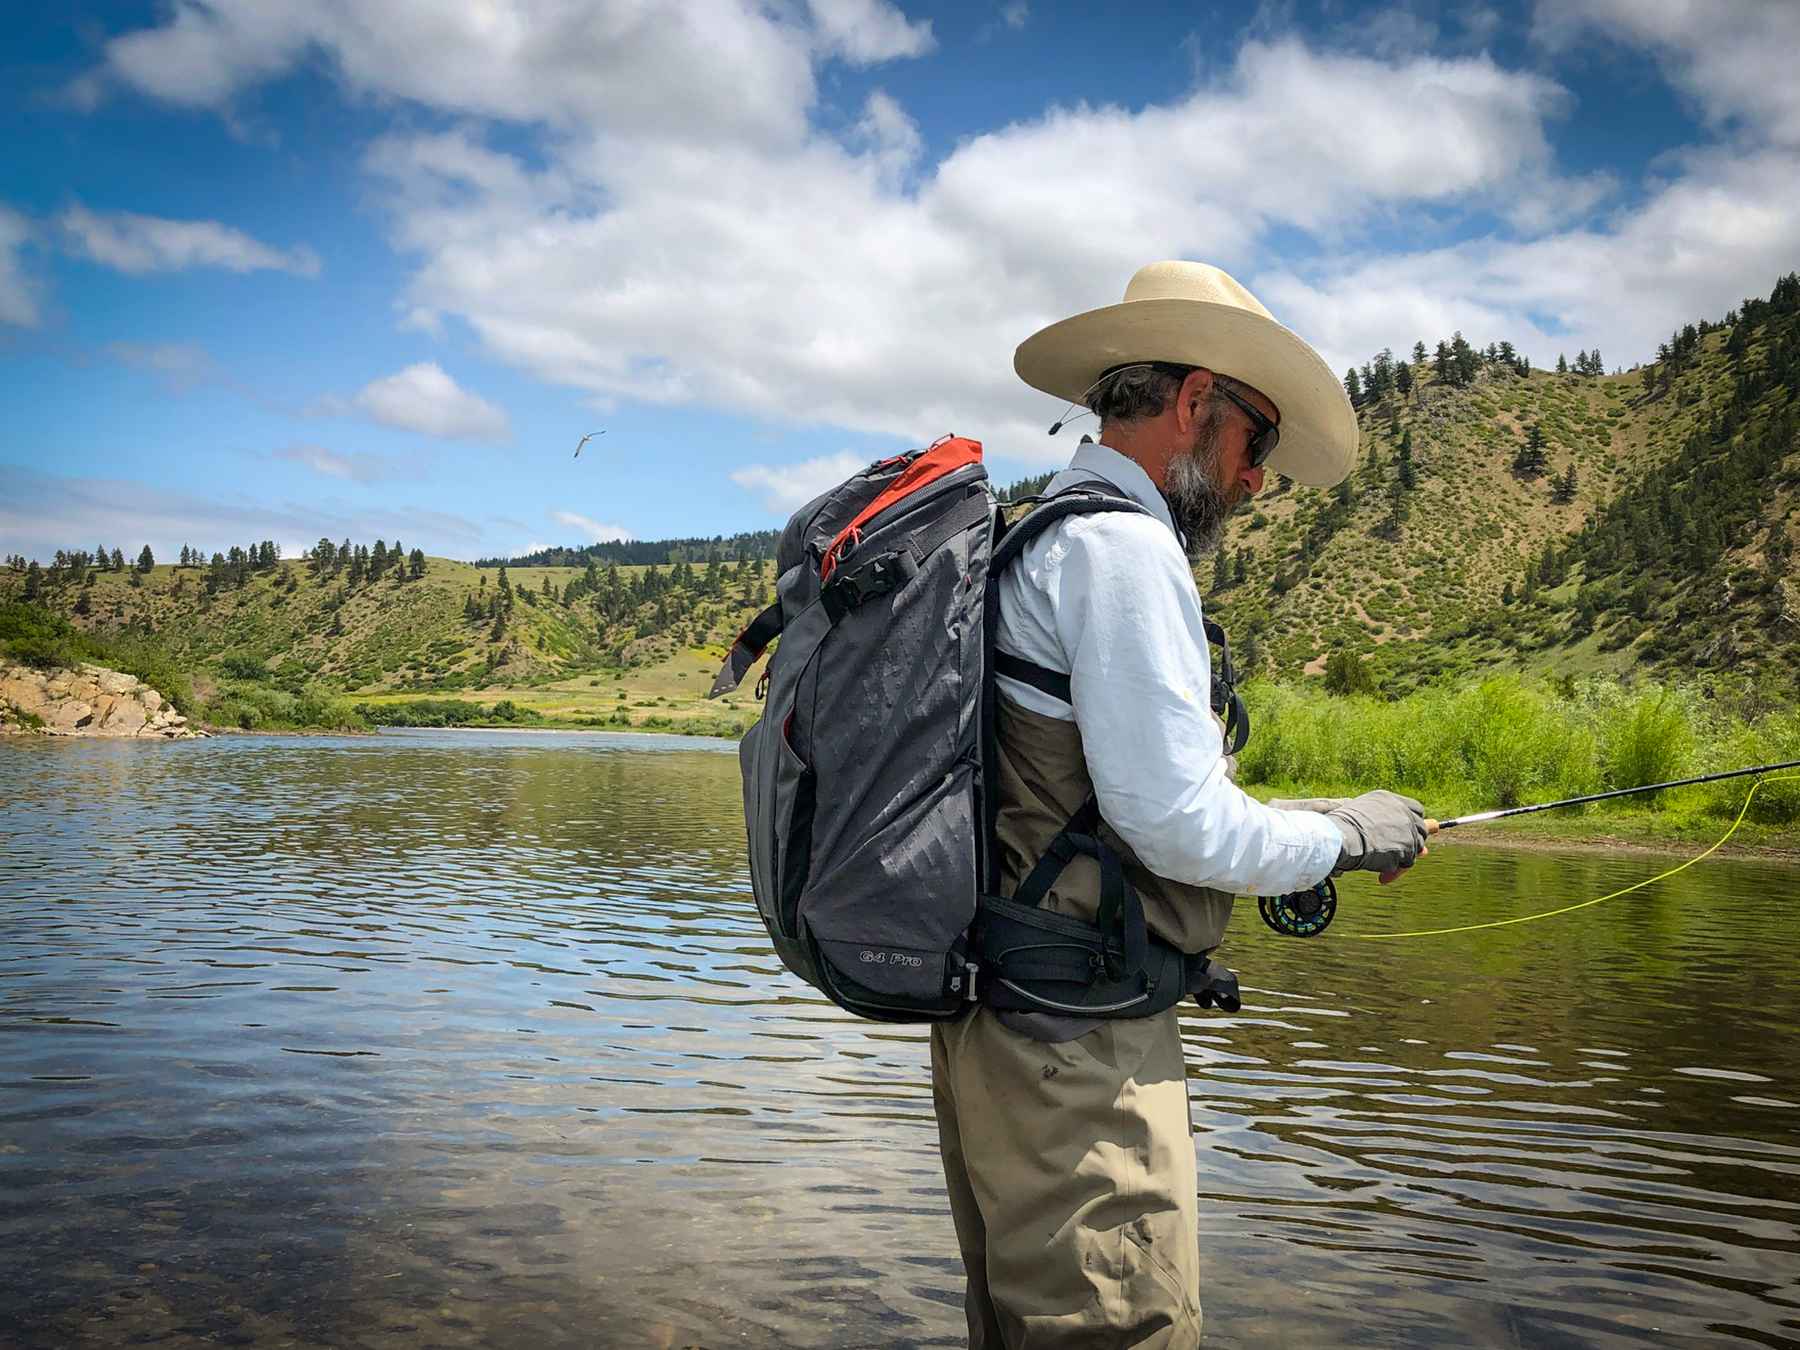 The Simms G4 Pro Sling Pack - How Good Is It? - Fly Fishing Asia